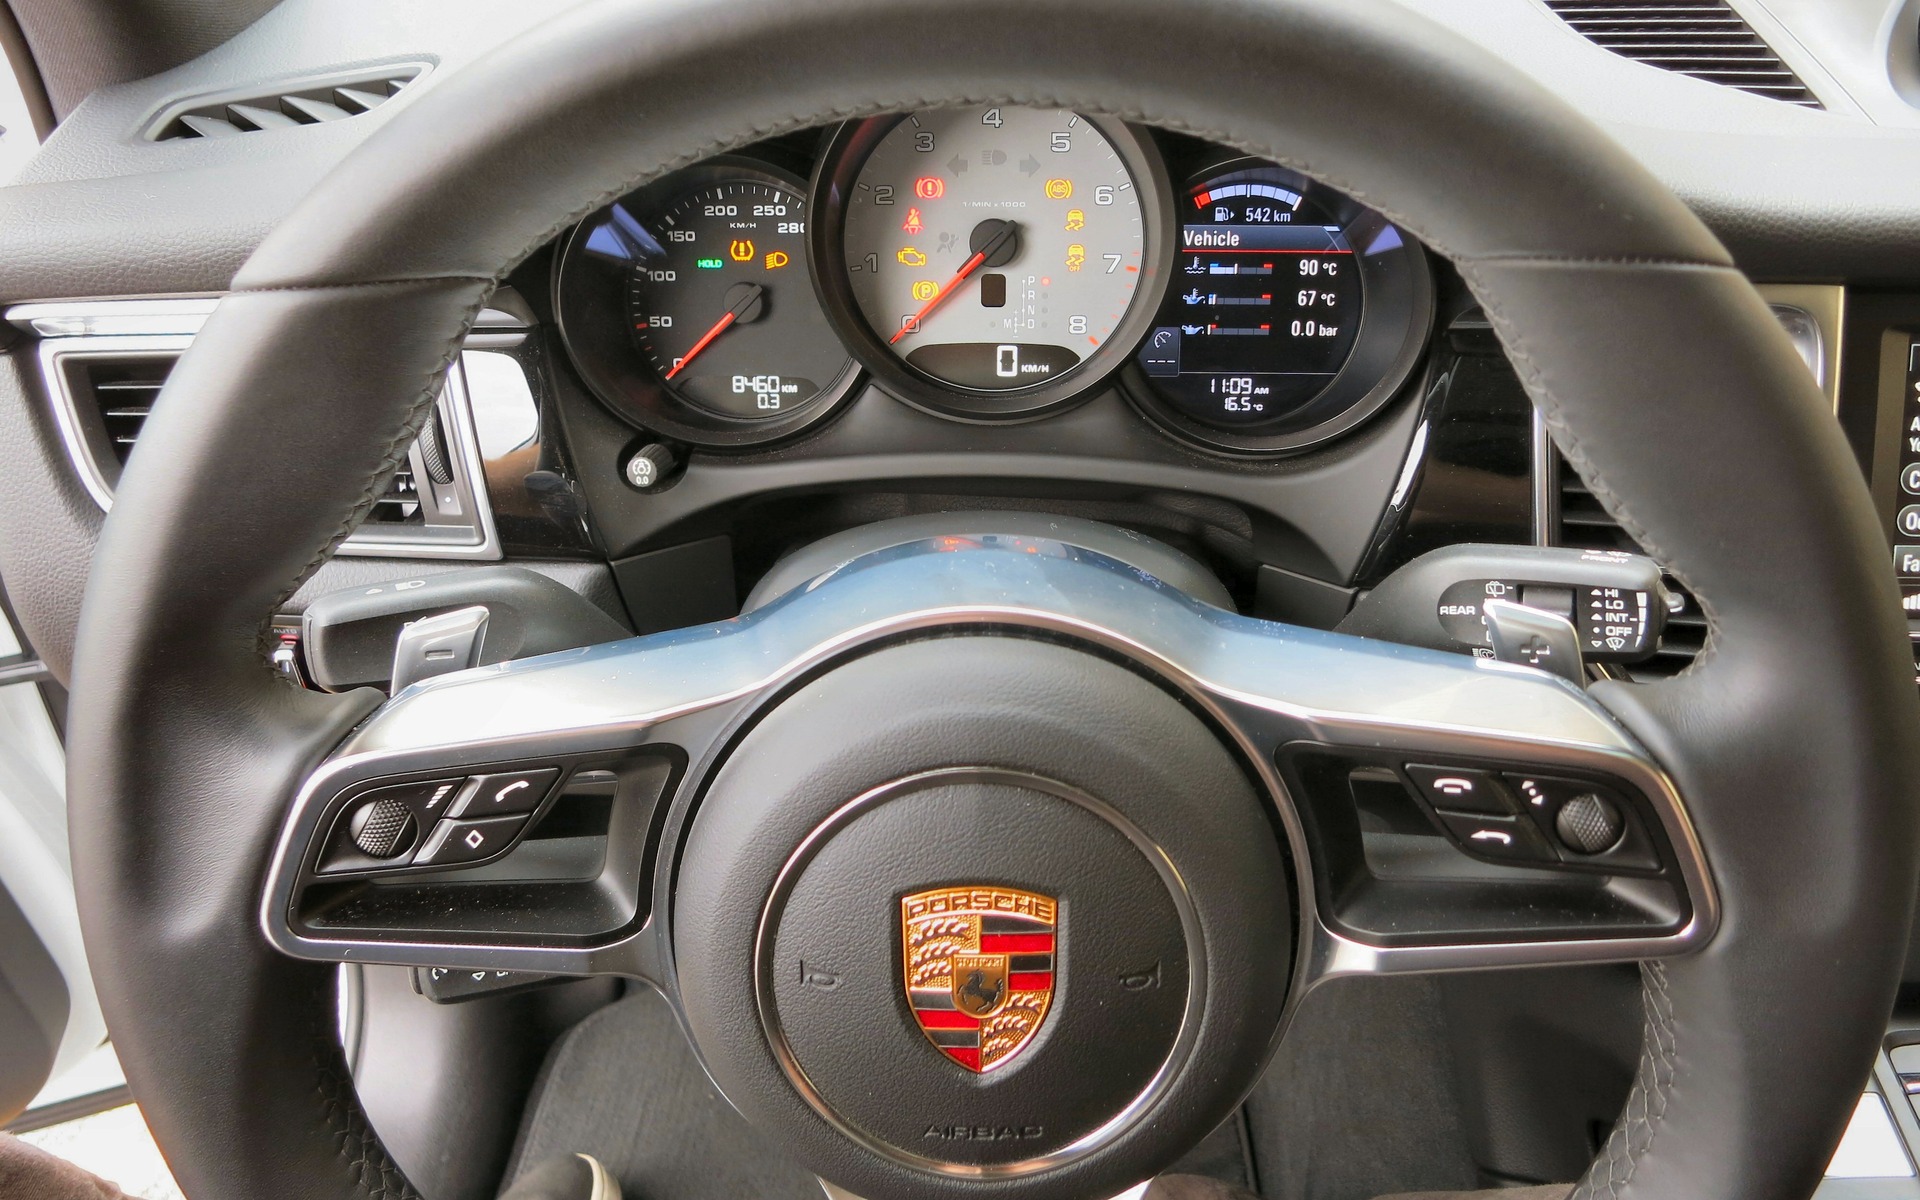 Porsche makes up for it with a very nice gauge cluster.